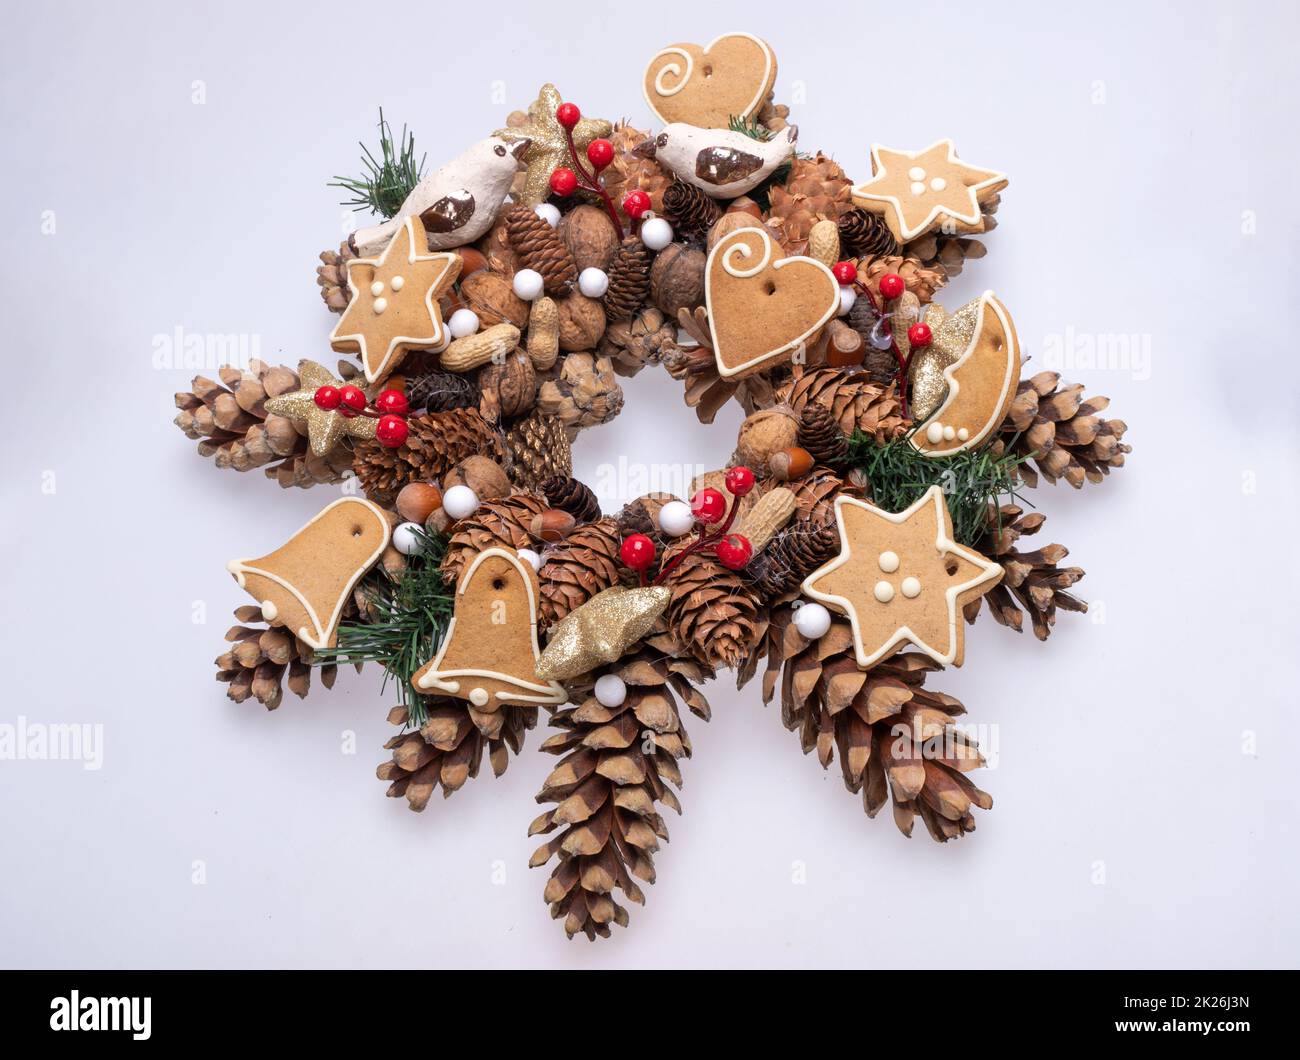 Christmas decorations with pine cones, nuts and handmade Christmas cookies Stock Photo